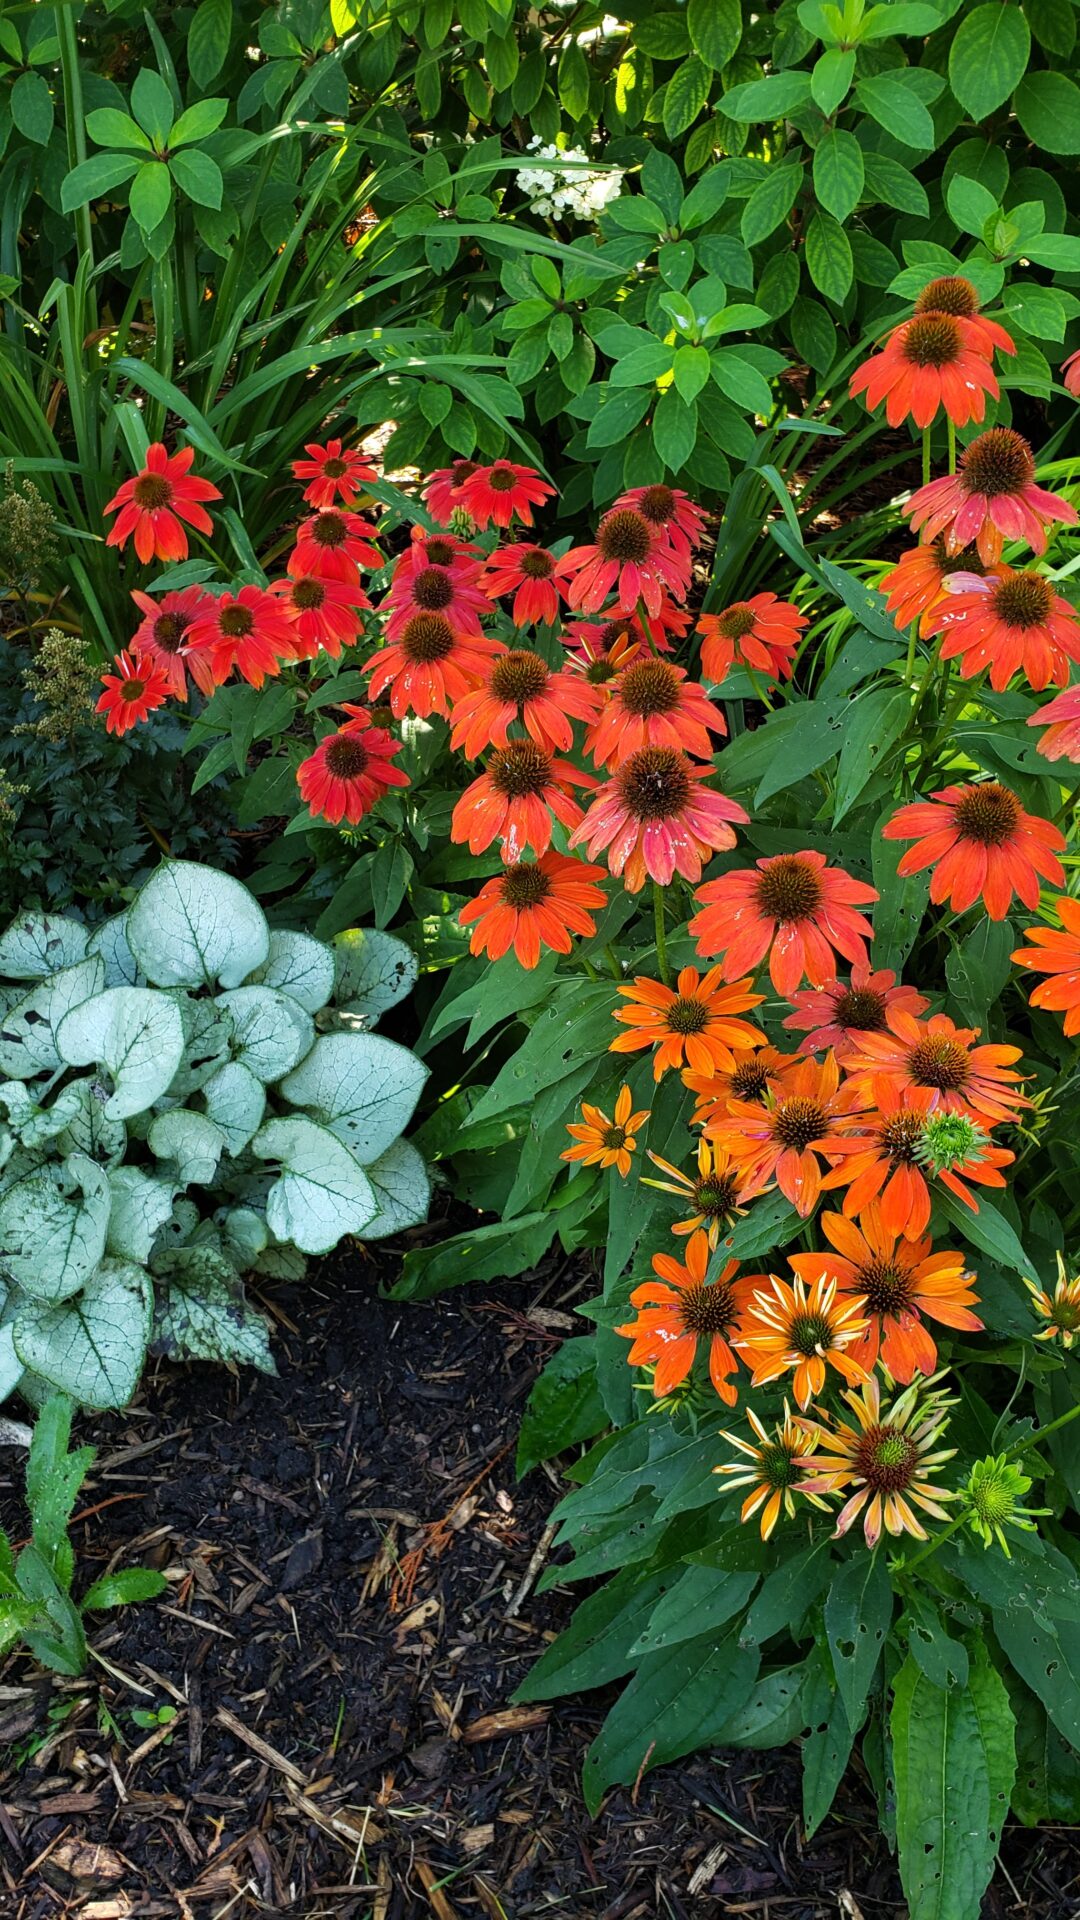 The image shows a vibrant garden with orange and red Echinacea flowers, green foliage, and white-leaved plants on a bright day.